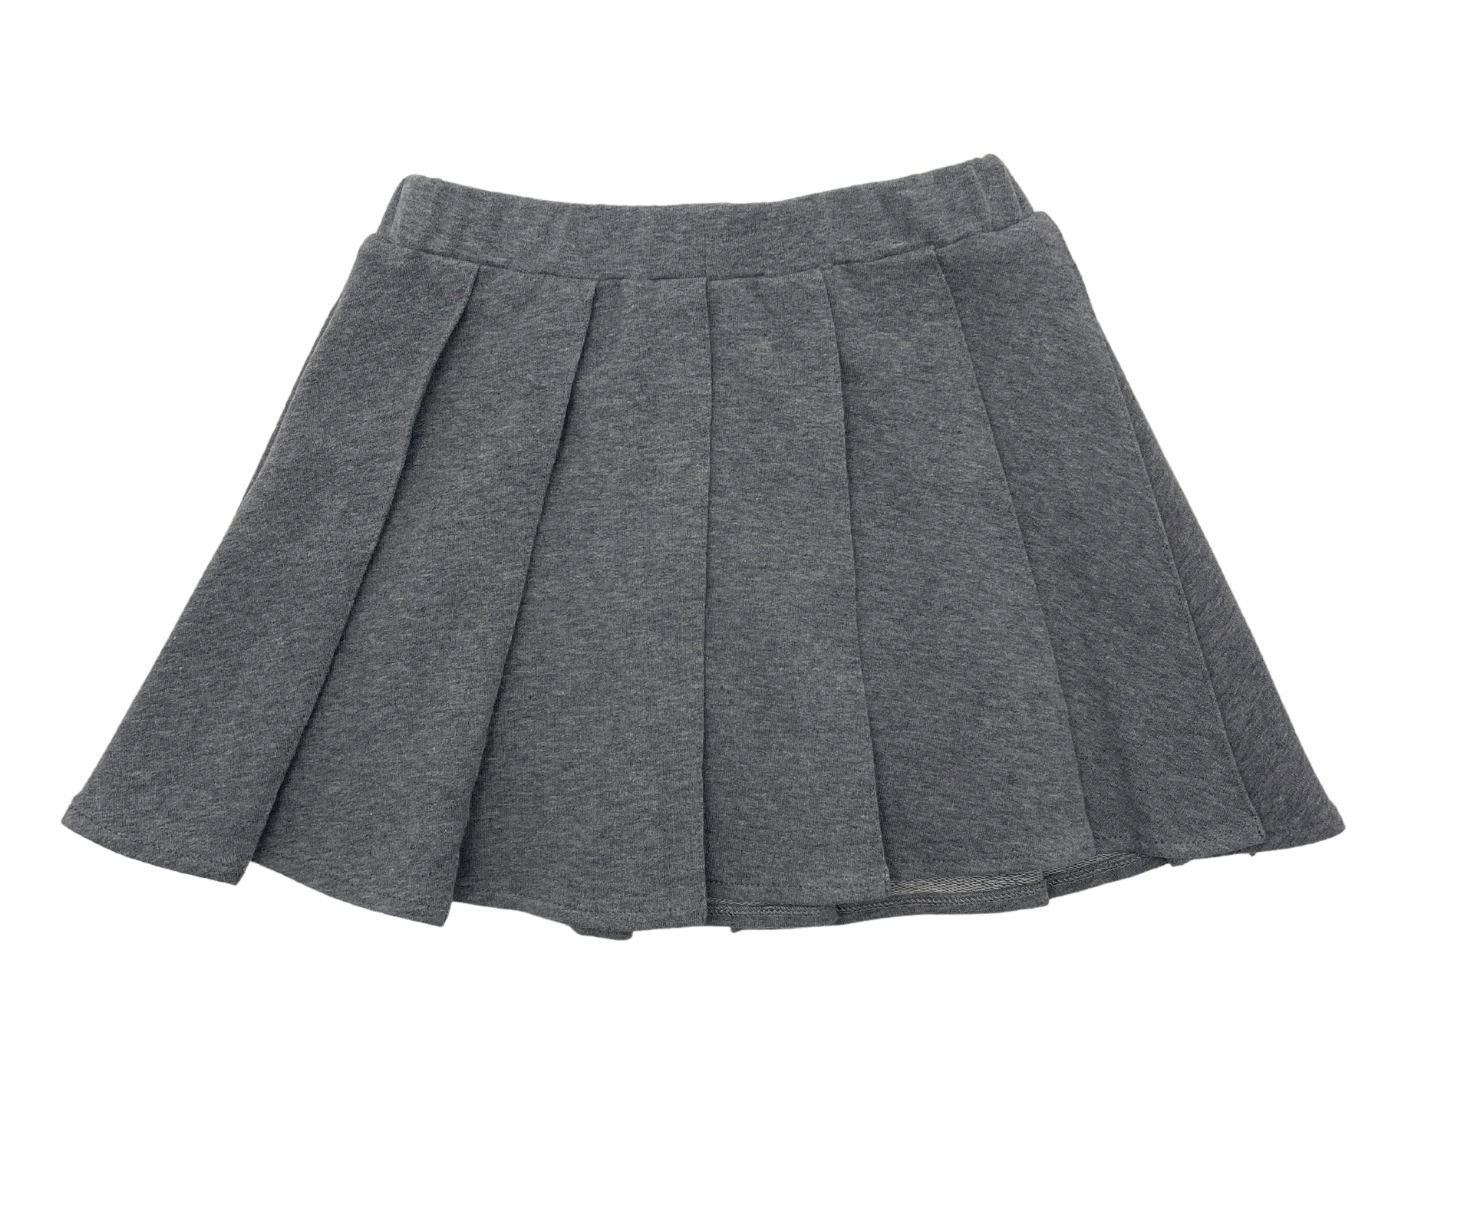 IL GUFO - Gray pleated skirt - 3 years old